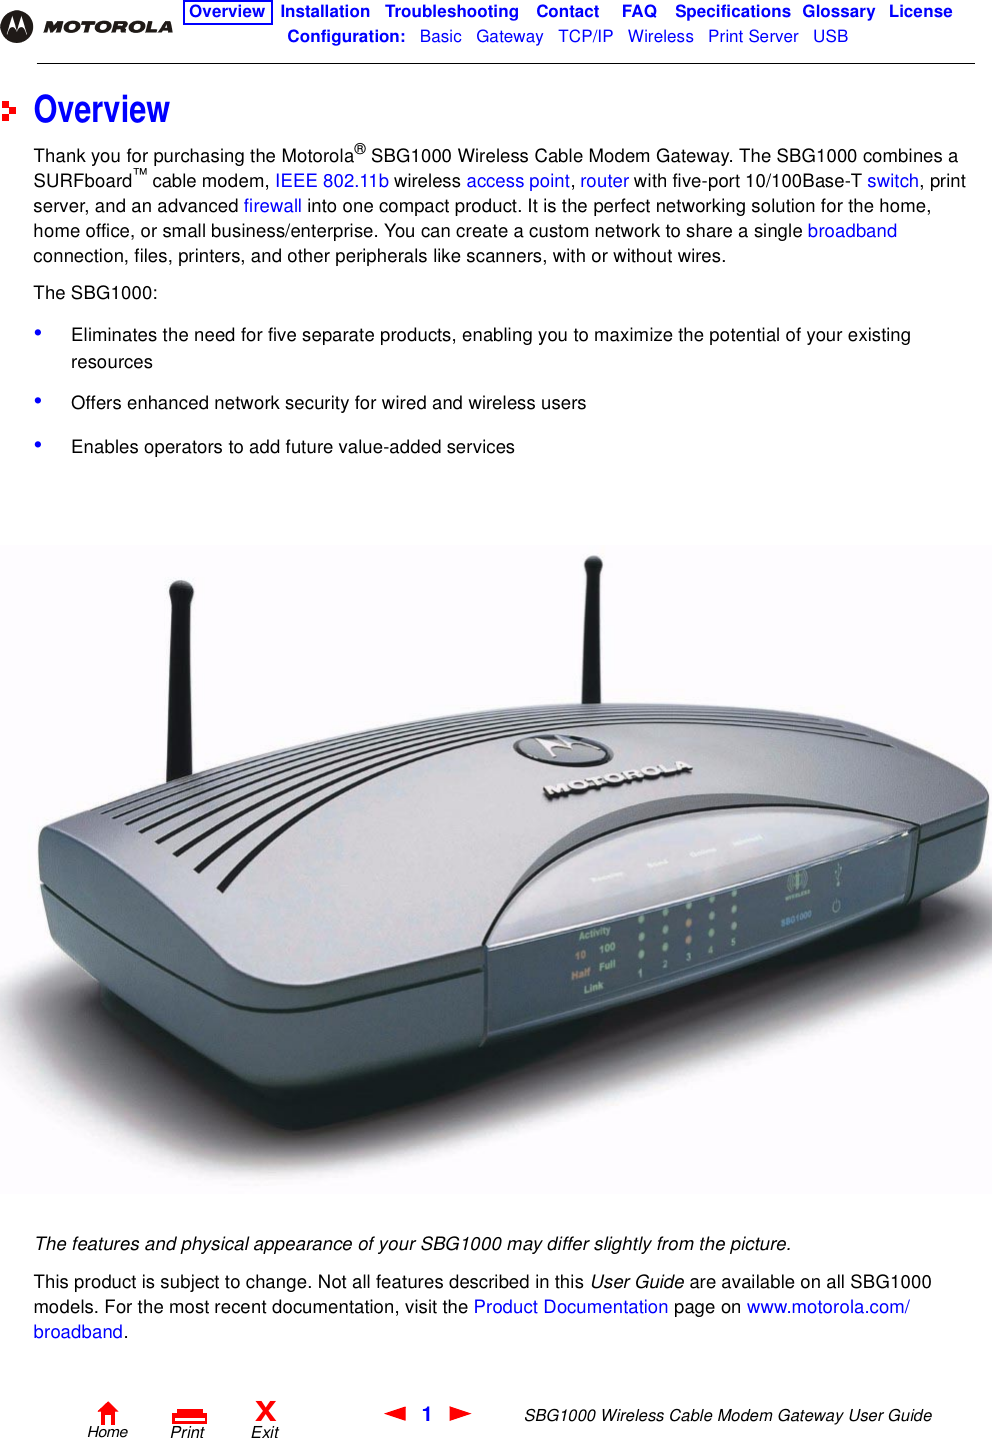 1SBG1000 Wireless Cable Modem Gateway User GuideHomeXExitPrintOverview Installation Troubleshooting Contact FAQ Specifications Glossary LicenseConfiguration:   Basic   Gateway   TCP/IP   Wireless   Print Server   USB   OverviewThank you for purchasing the Motorola® SBG1000 Wireless Cable Modem Gateway. The SBG1000 combines a SURFboard™ cable modem, IEEE 802.11b wireless access point, router with five-port 10/100Base-T switch, print server, and an advanced firewall into one compact product. It is the perfect networking solution for the home, home office, or small business/enterprise. You can create a custom network to share a single broadband connection, files, printers, and other peripherals like scanners, with or without wires. The SBG1000:•Eliminates the need for five separate products, enabling you to maximize the potential of your existing resources•Offers enhanced network security for wired and wireless users•Enables operators to add future value-added servicesThe features and physical appearance of your SBG1000 may differ slightly from the picture. This product is subject to change. Not all features described in this User Guide are available on all SBG1000 models. For the most recent documentation, visit the Product Documentation page on www.motorola.com/broadband.